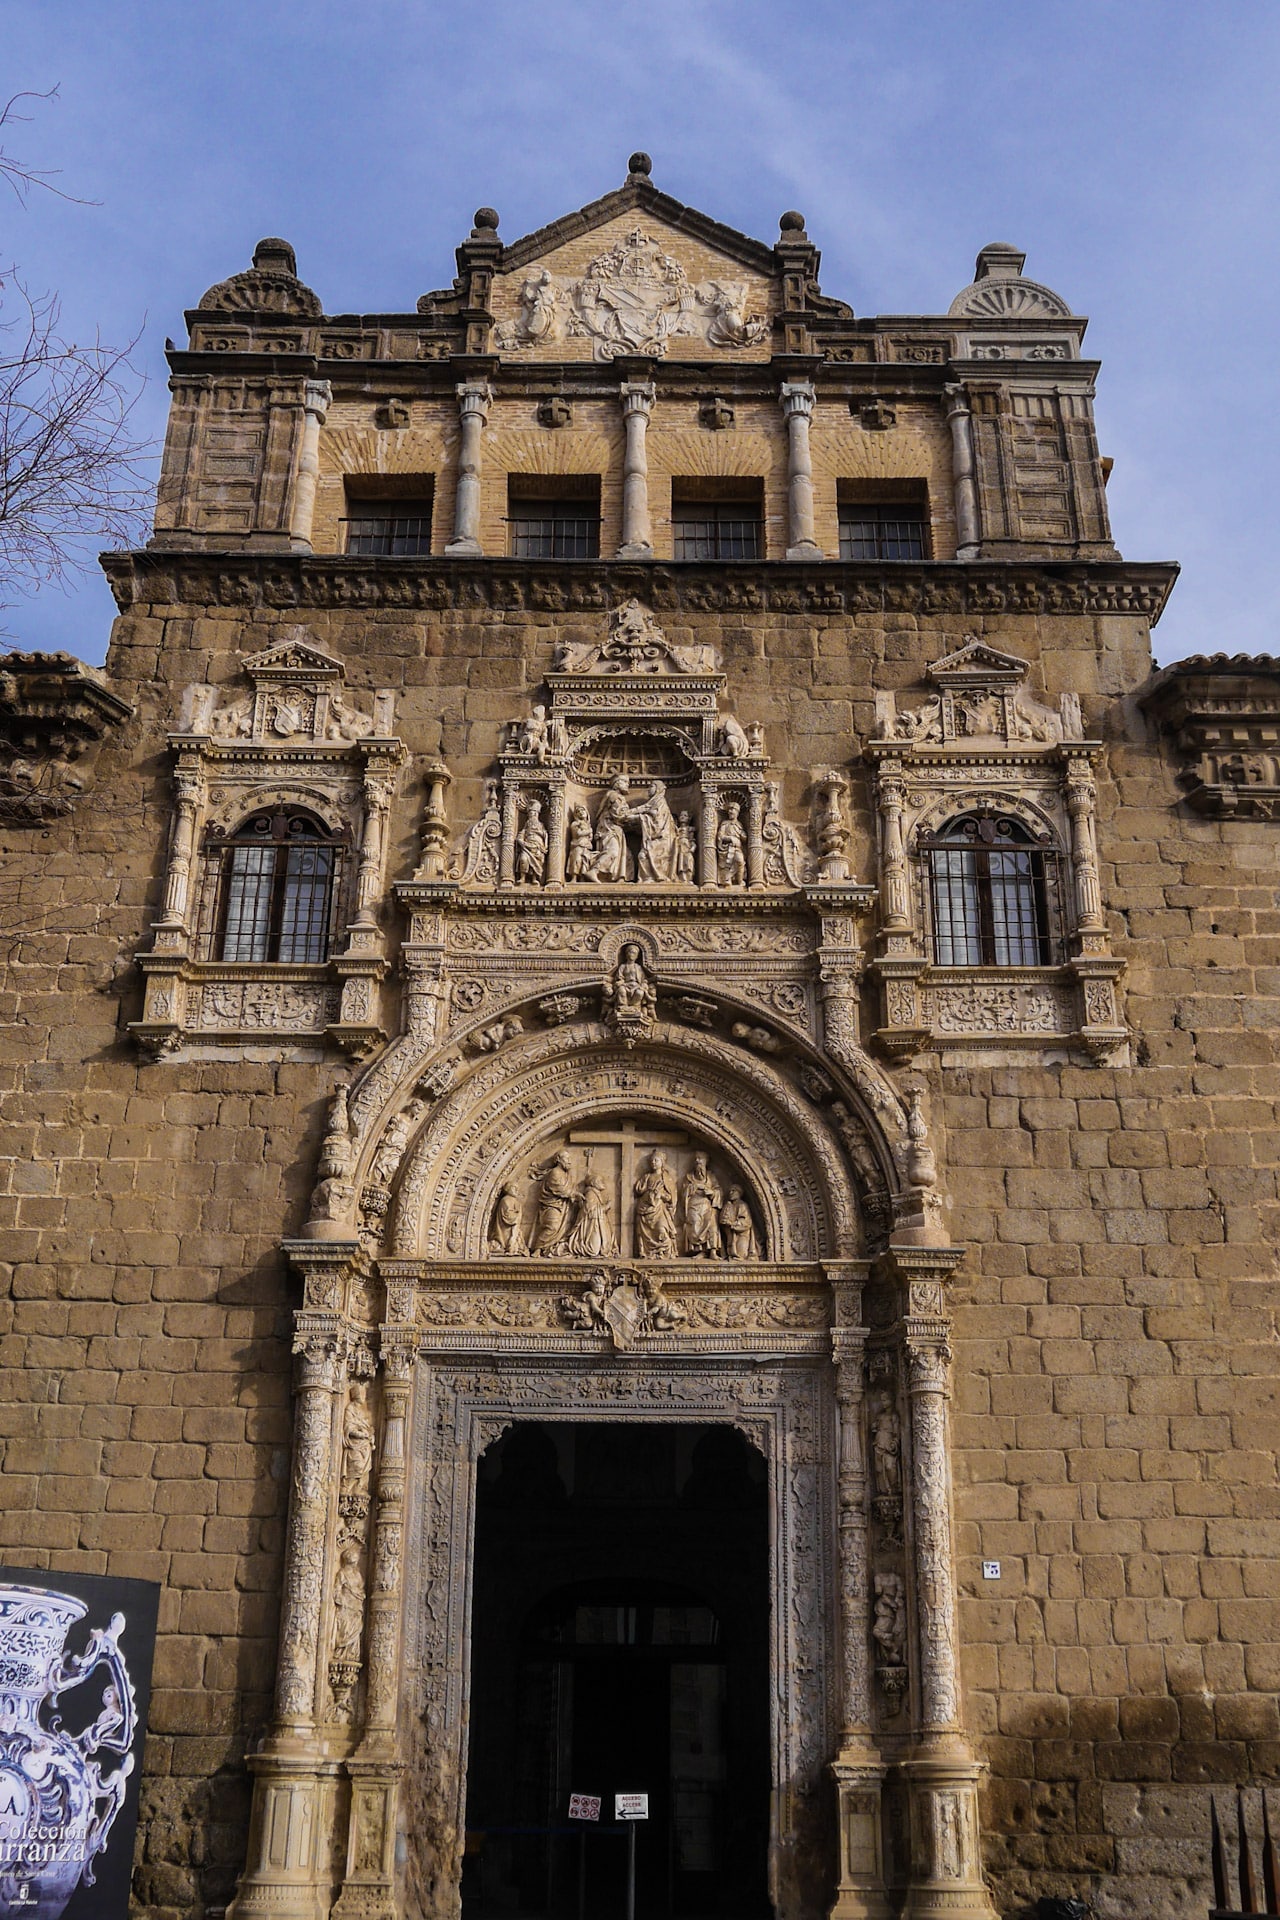 Museo of Santa Cruz is one of the most visited attractions in Toledo